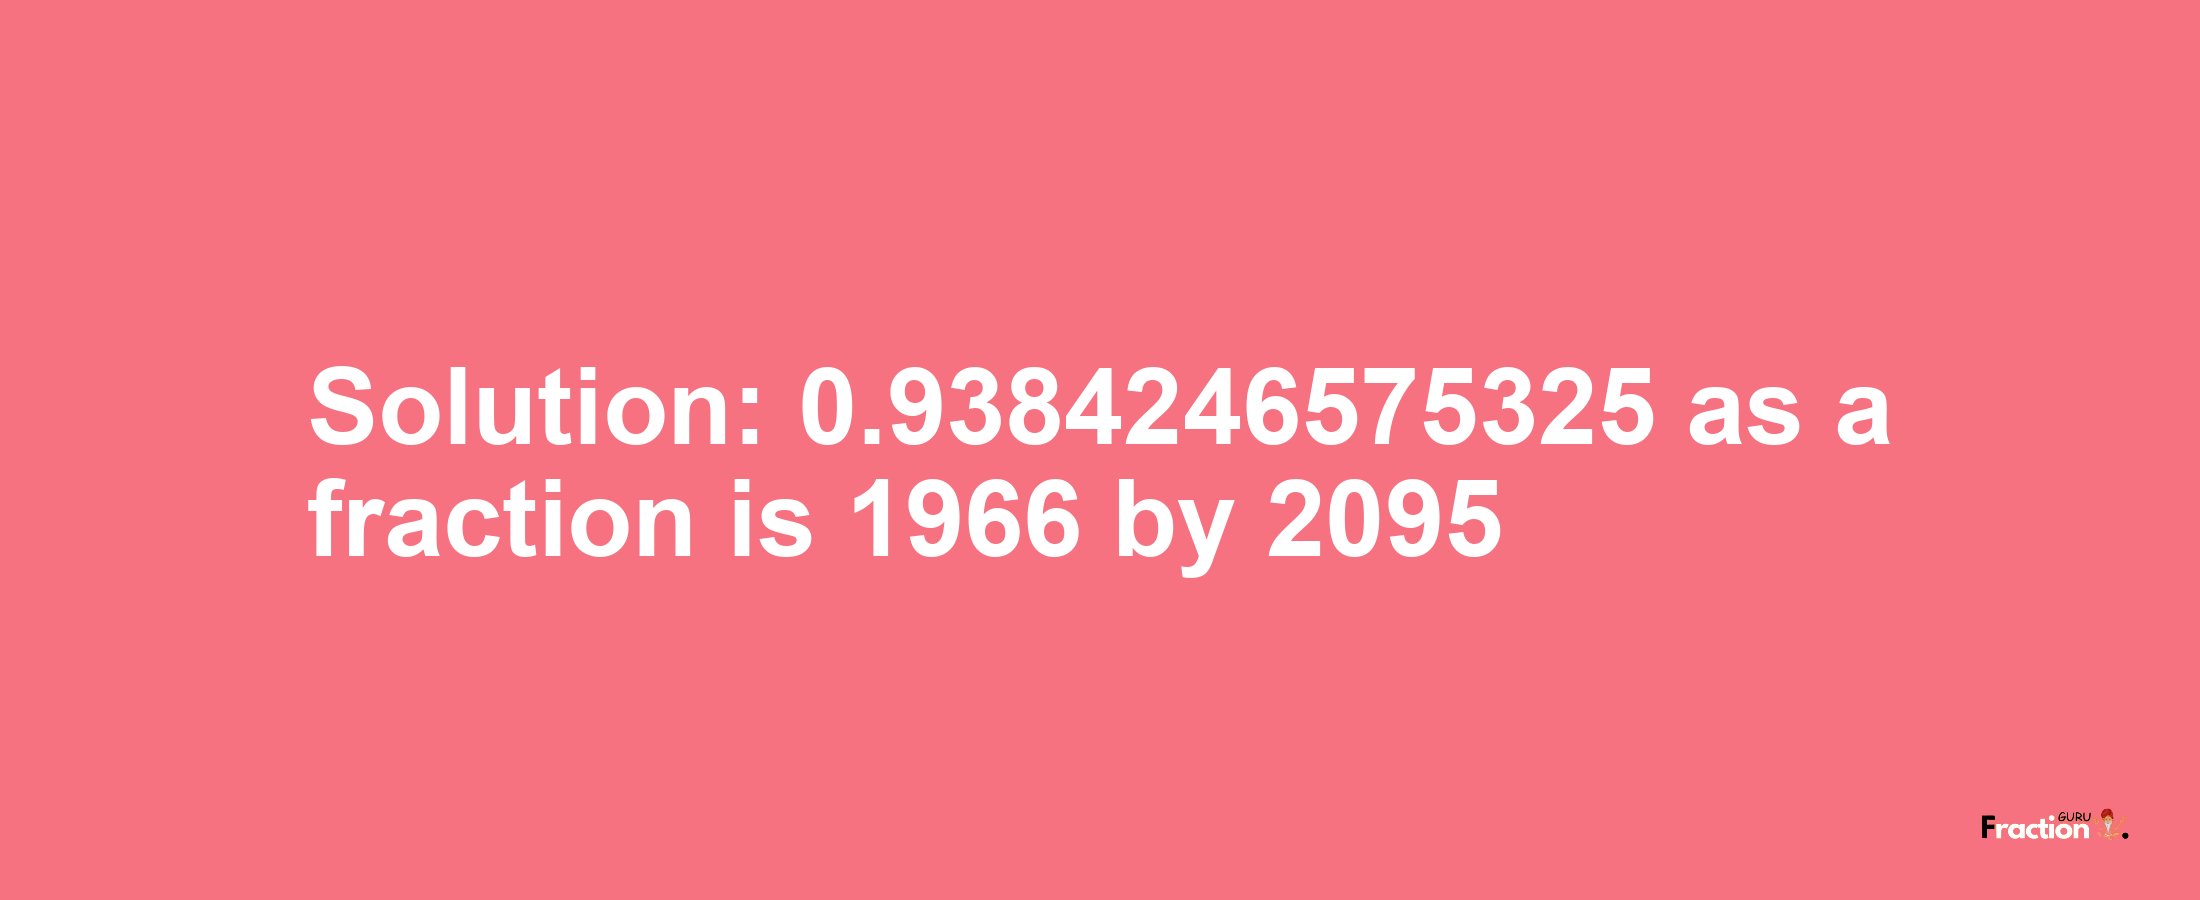 Solution:0.9384246575325 as a fraction is 1966/2095